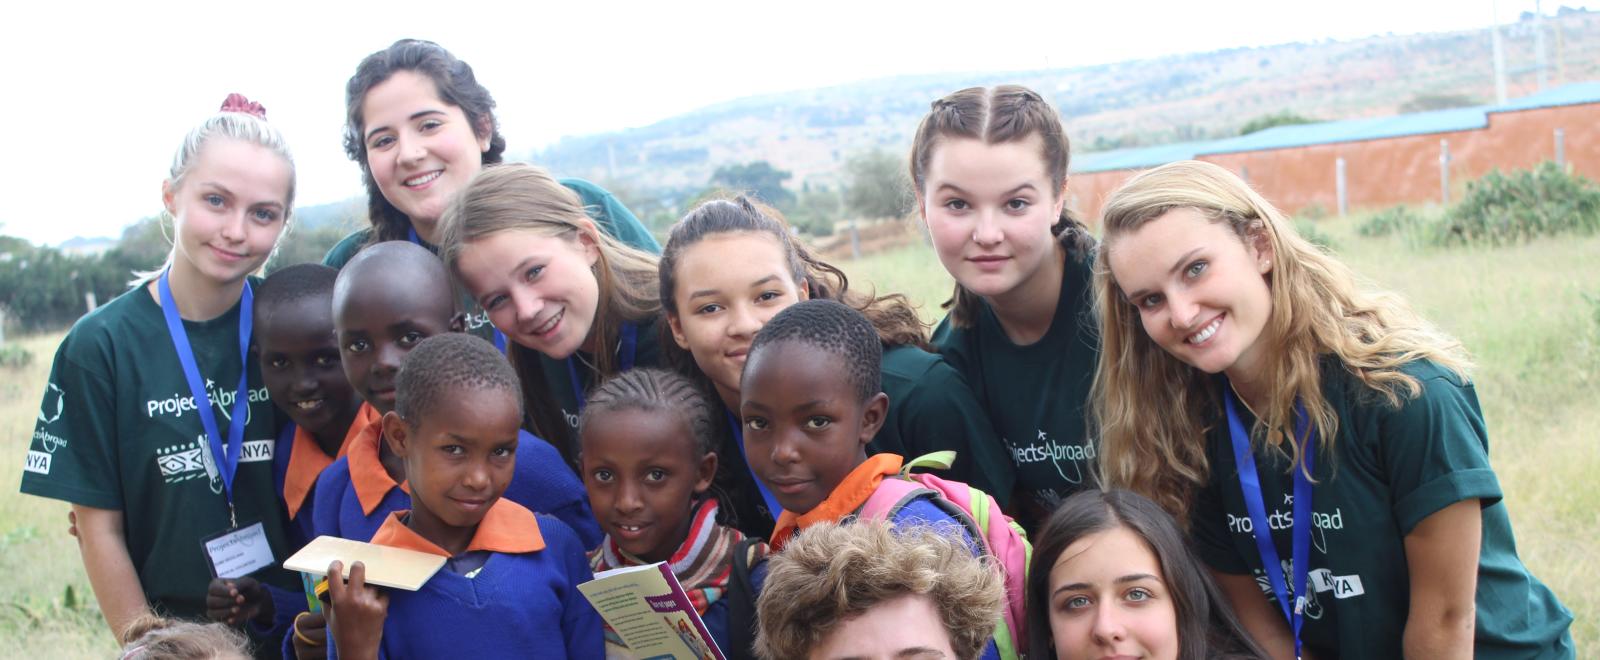 Healthcare volunteers take a group photo with students during a medical outreach in Kenya